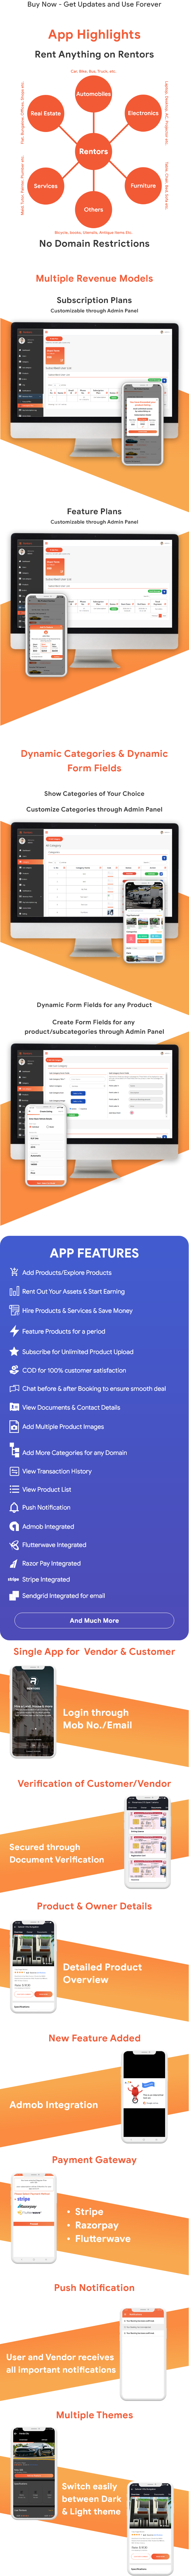 Rentors - Universal Android App For Renting and Hiring - 4